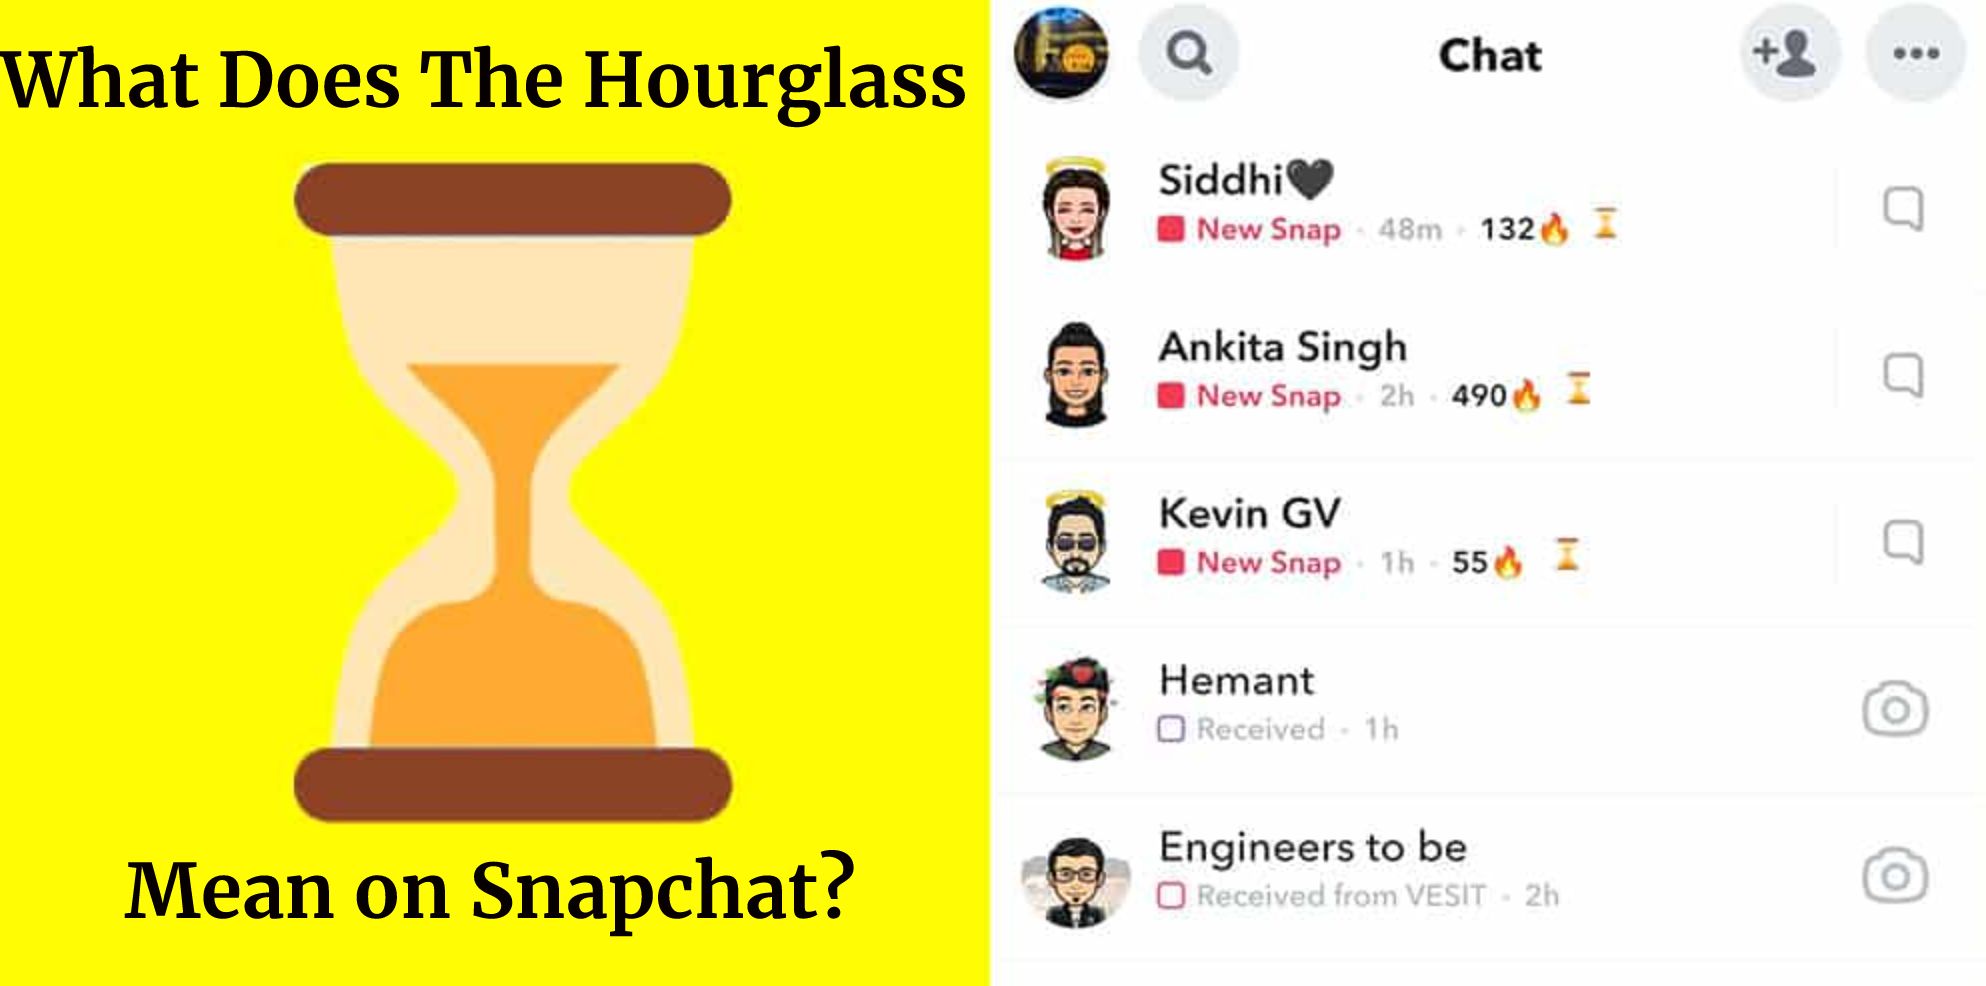 What Does The Hourglass Mean on Snapchat